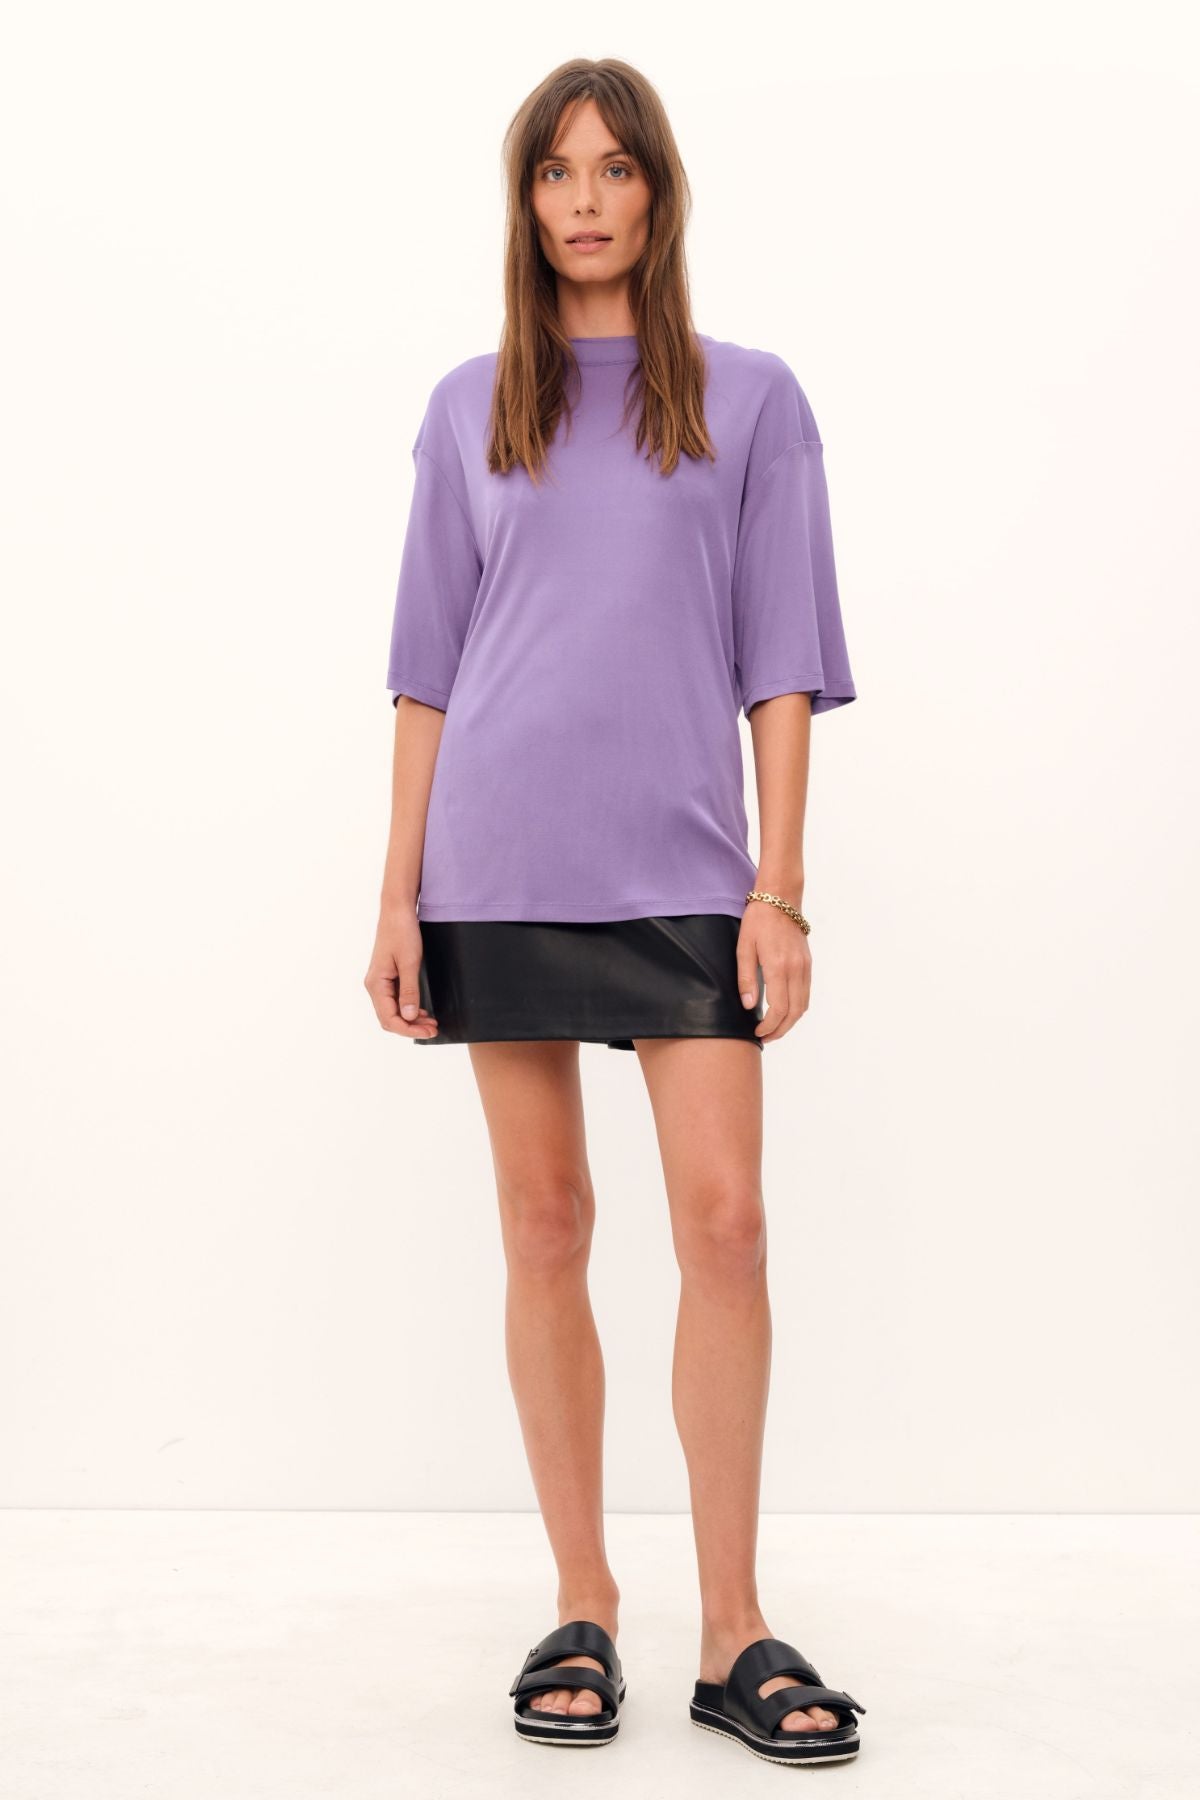 Exquisitely crafted from silk viscose jersey in a delicate lilac hue, the Aphrodite Top boasts a casual tee silhouette, a luxuriously silken knit fabric, and a sleek, high, round neckline.